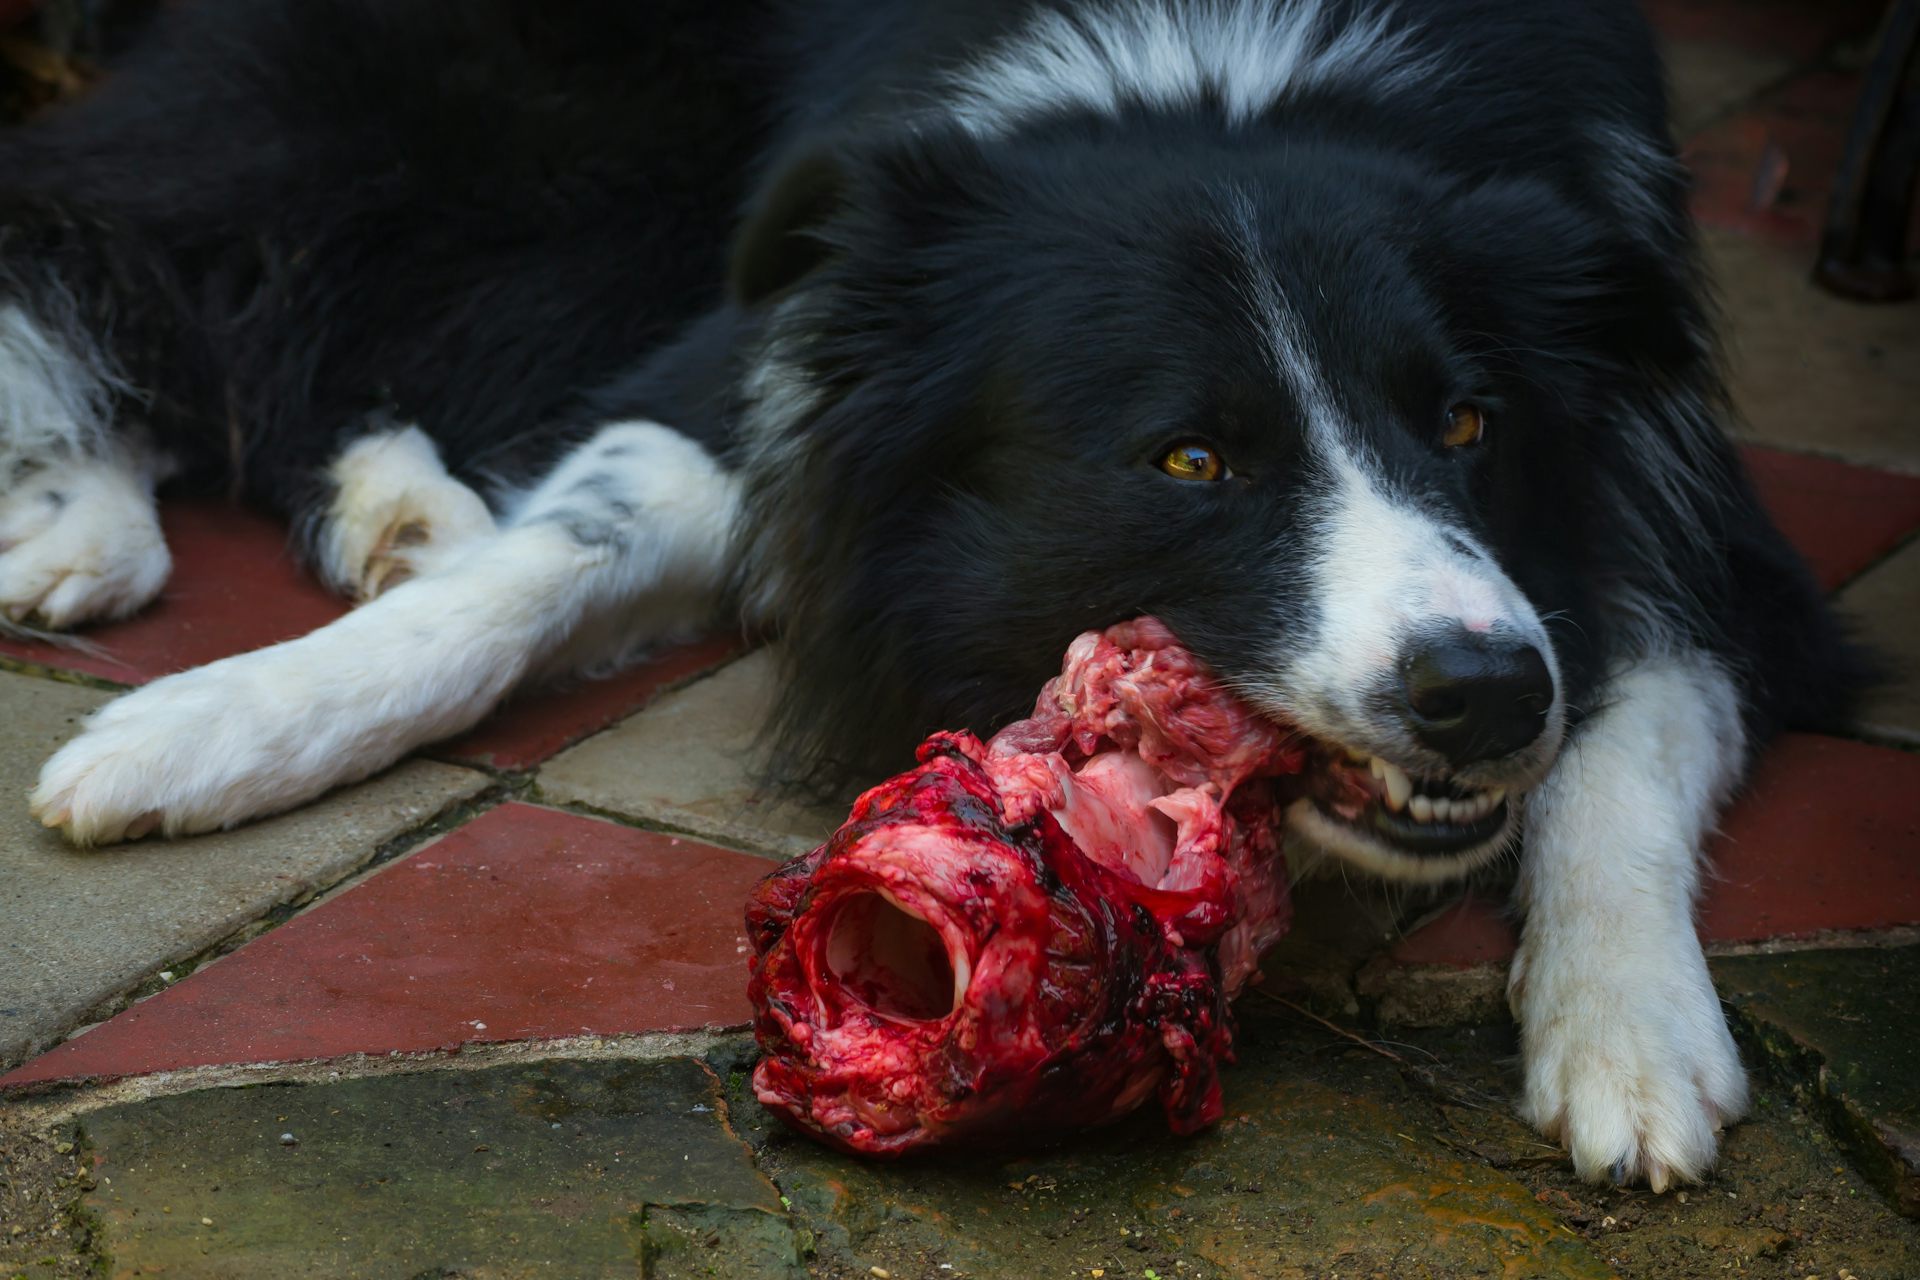 Should you feed your pet raw meat? The 